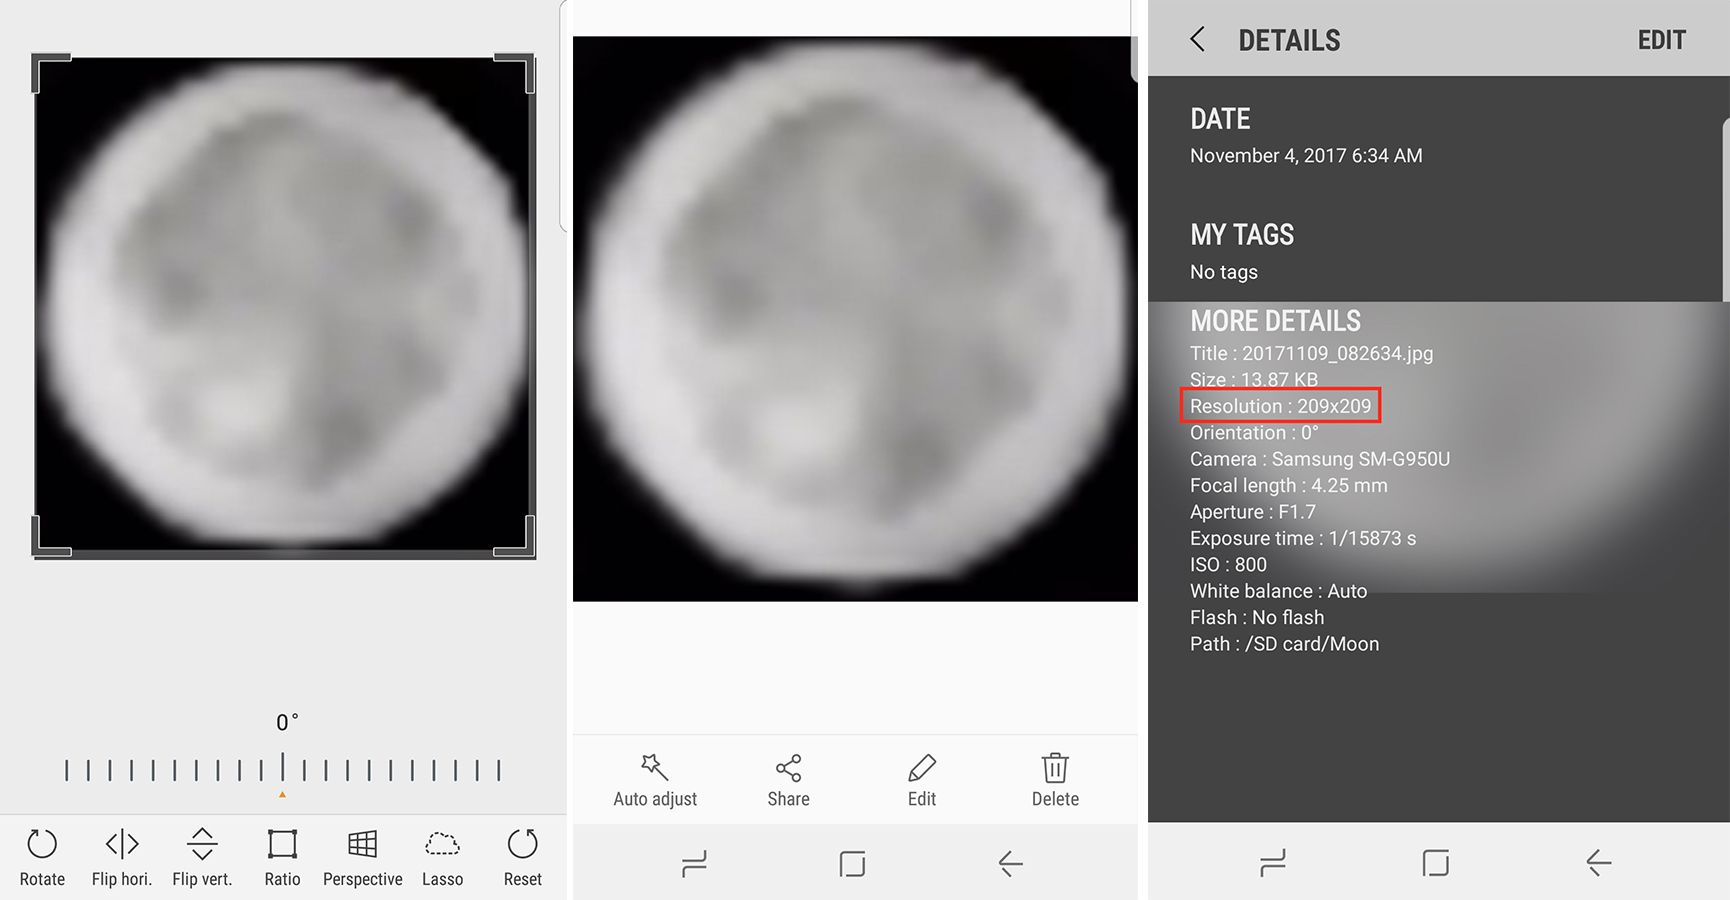 Screenshots showing how to crop an image on an Android device